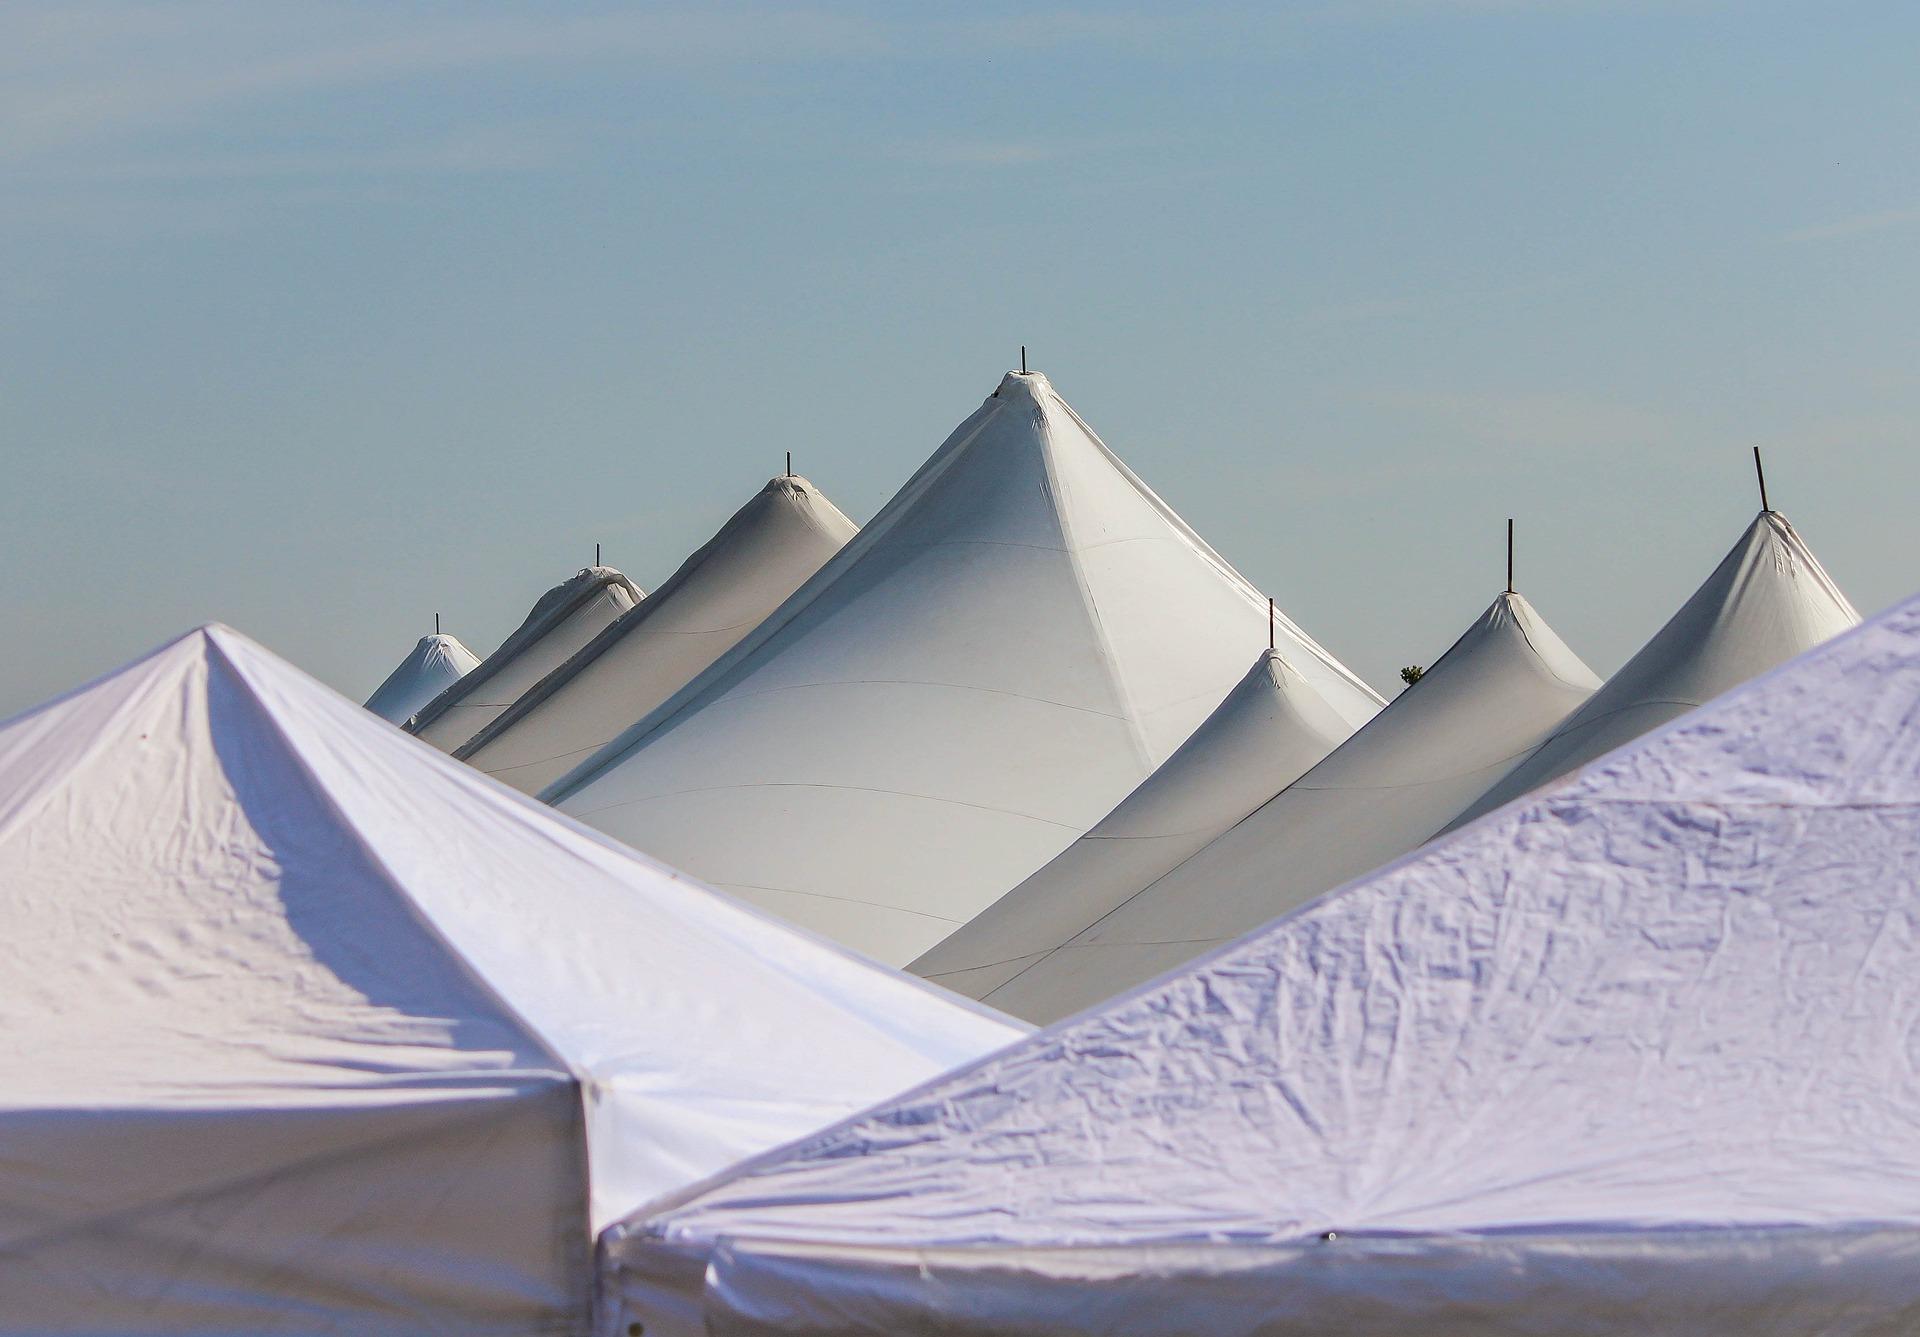 Giant white tents with the sky in the background.